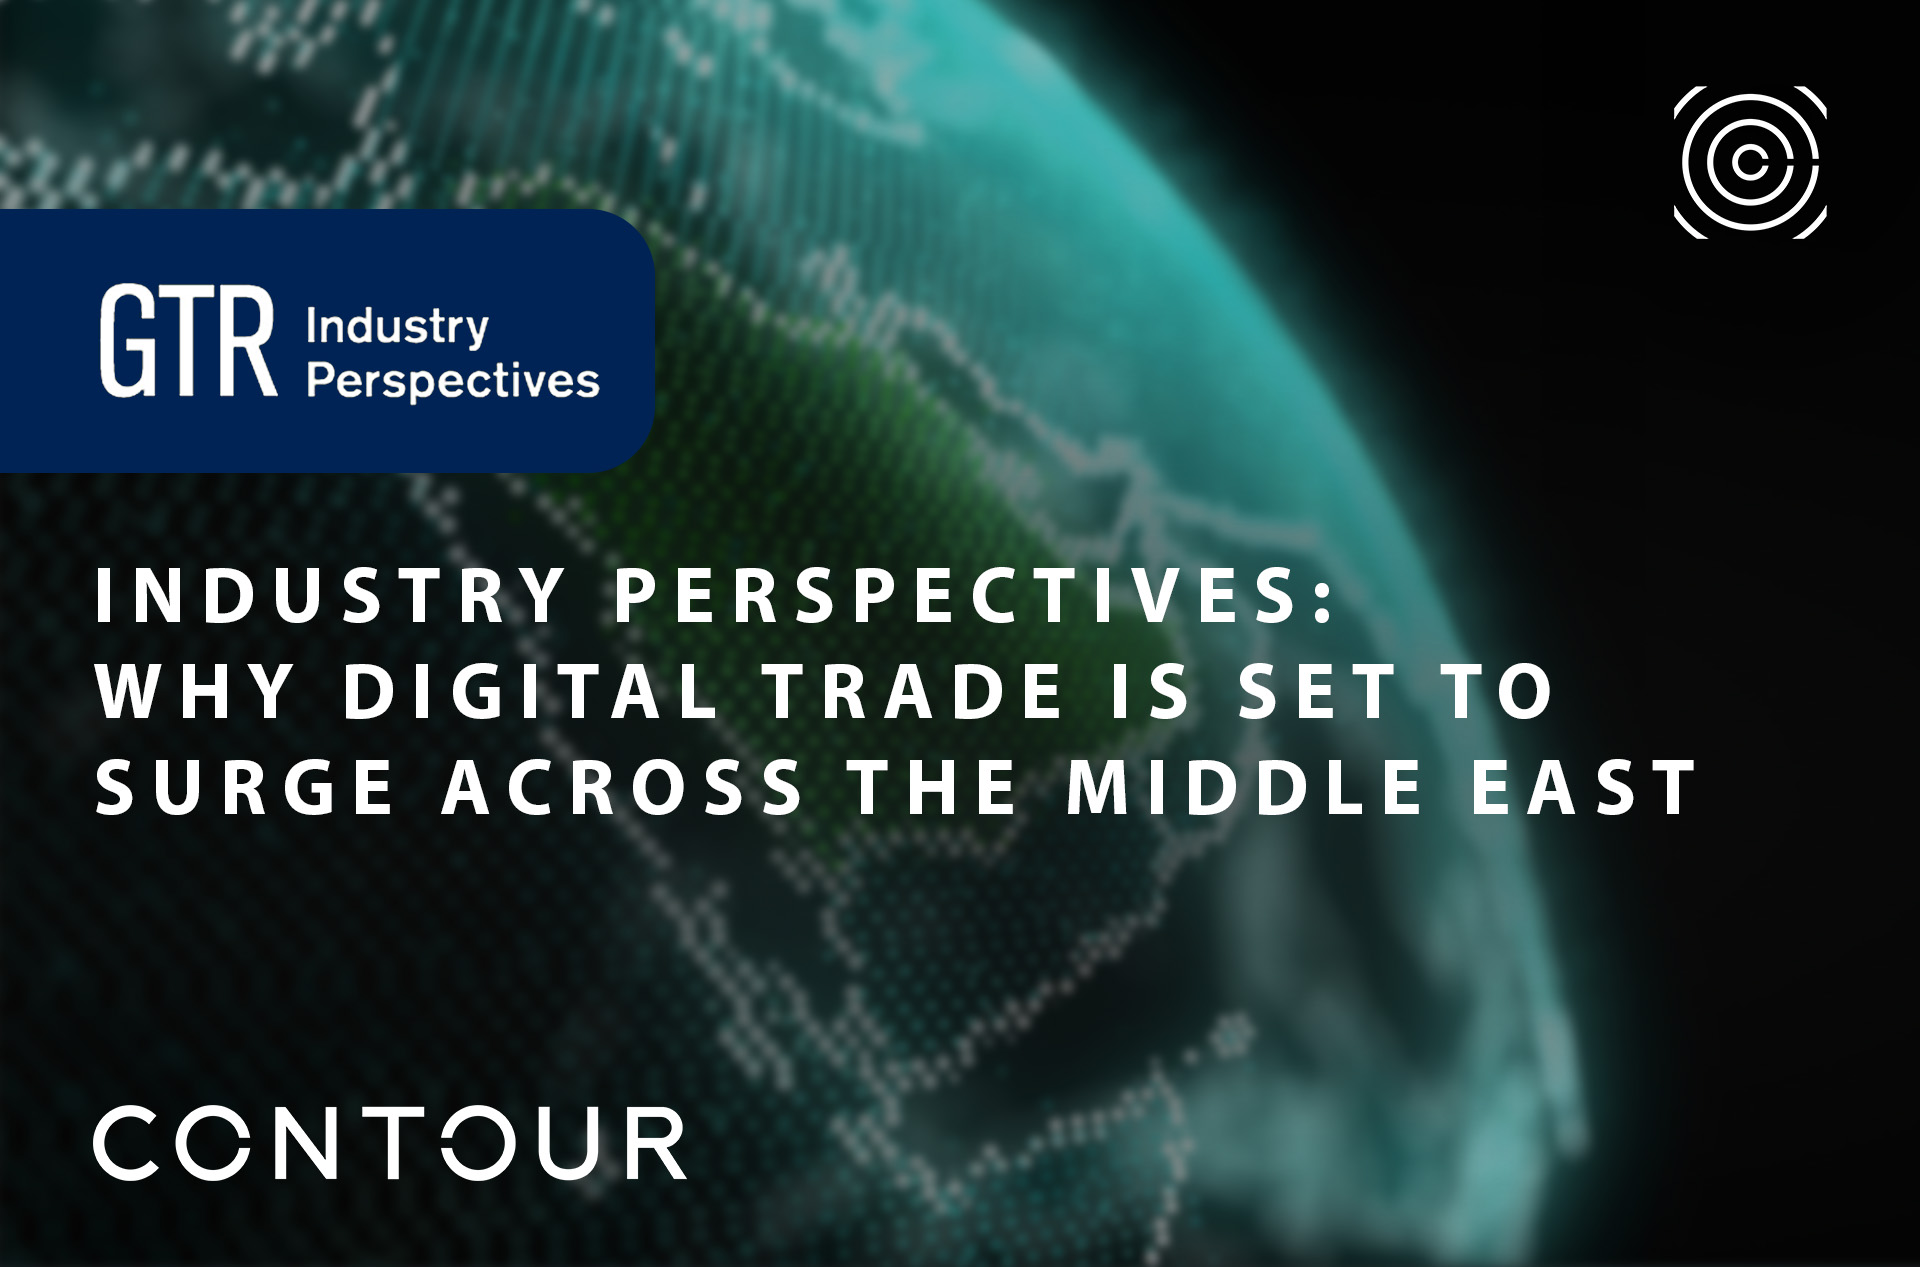 Industry Perspectives: Why digital trade is set to surge across the Middle East